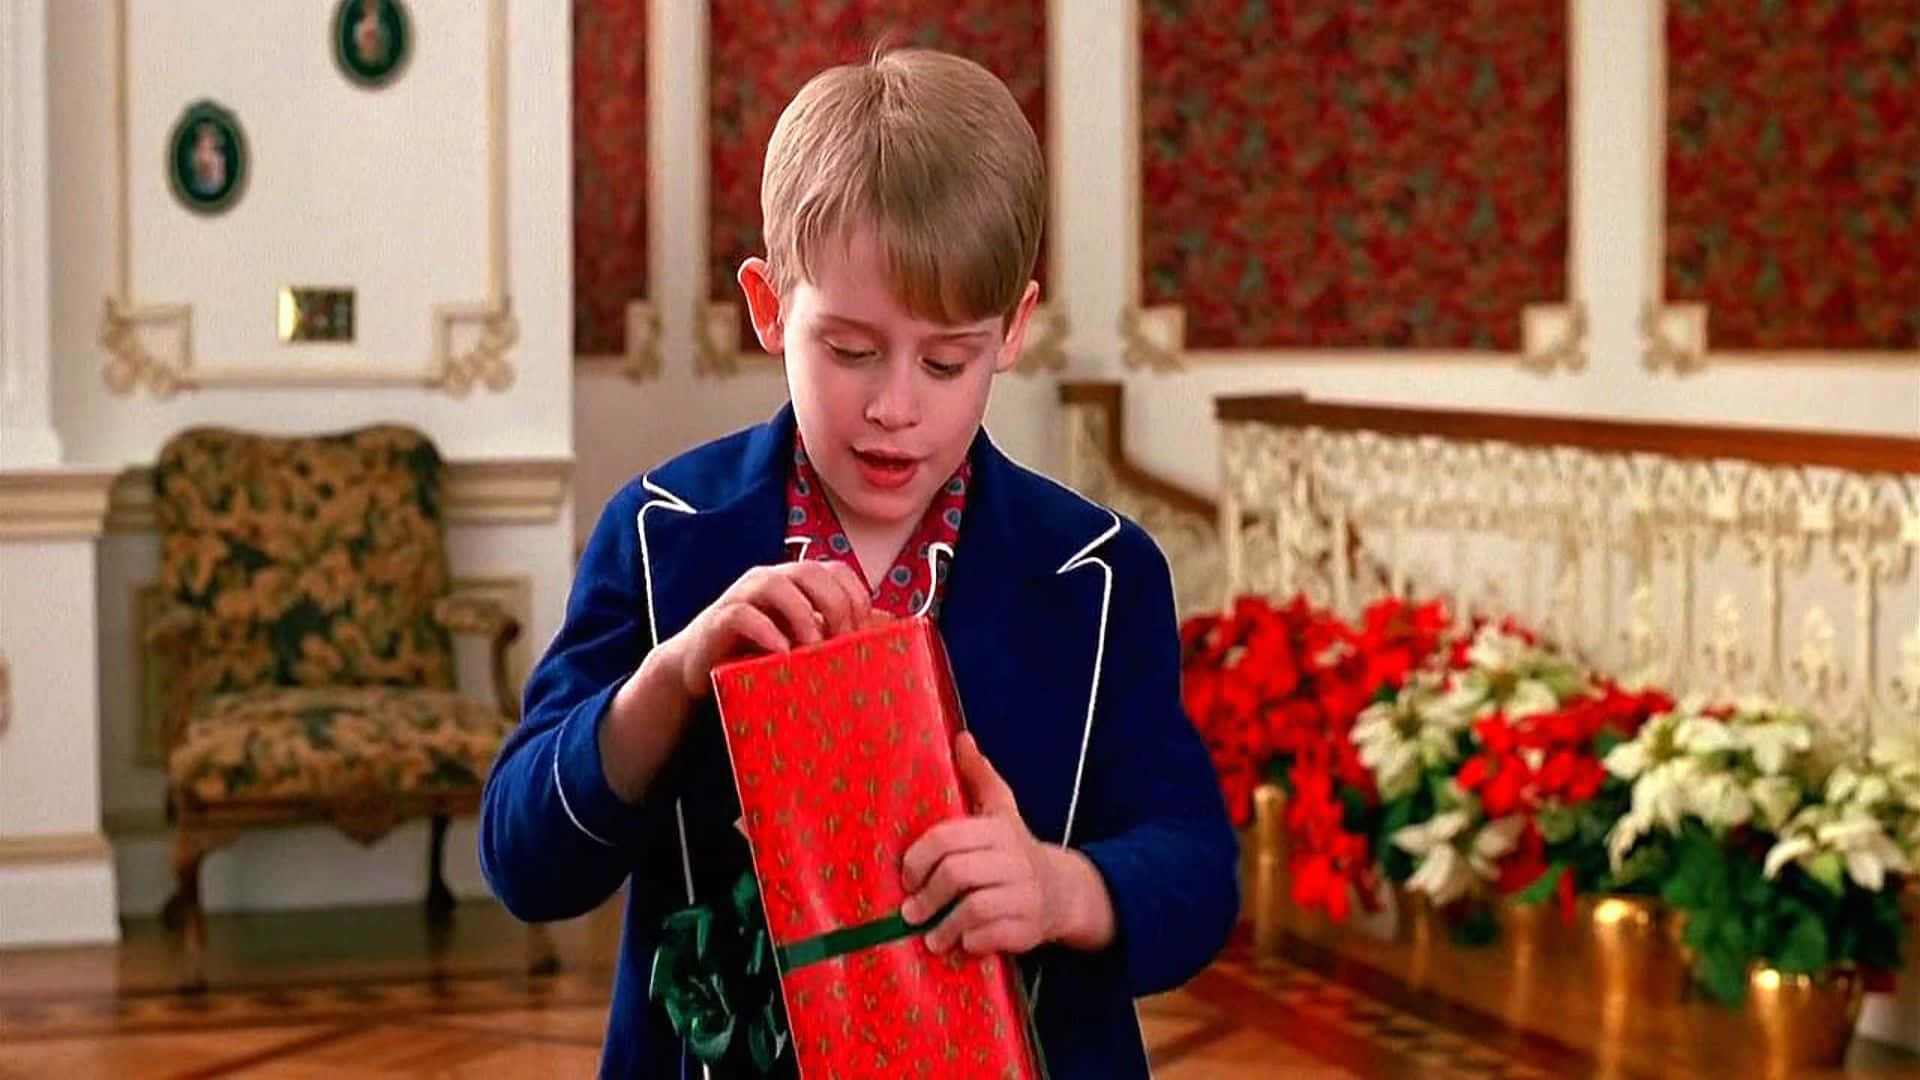 Kevin McAllister defends his home against robbers in 'Home Alone'.